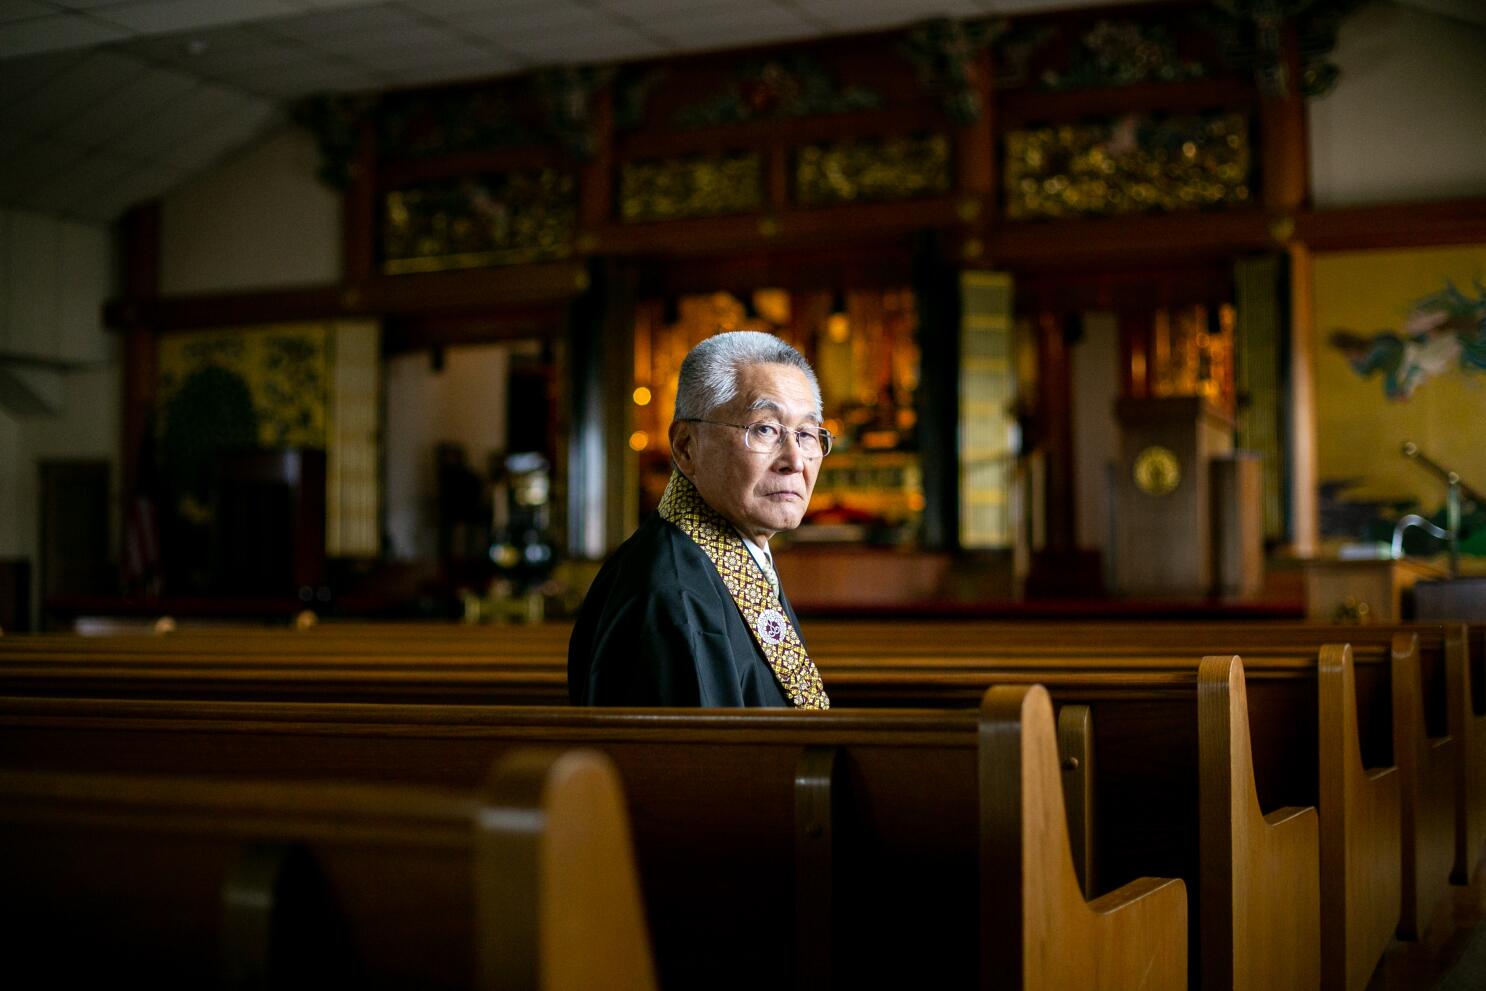 Kenji Akahoshi on his retirement as a Buddhist minister and why